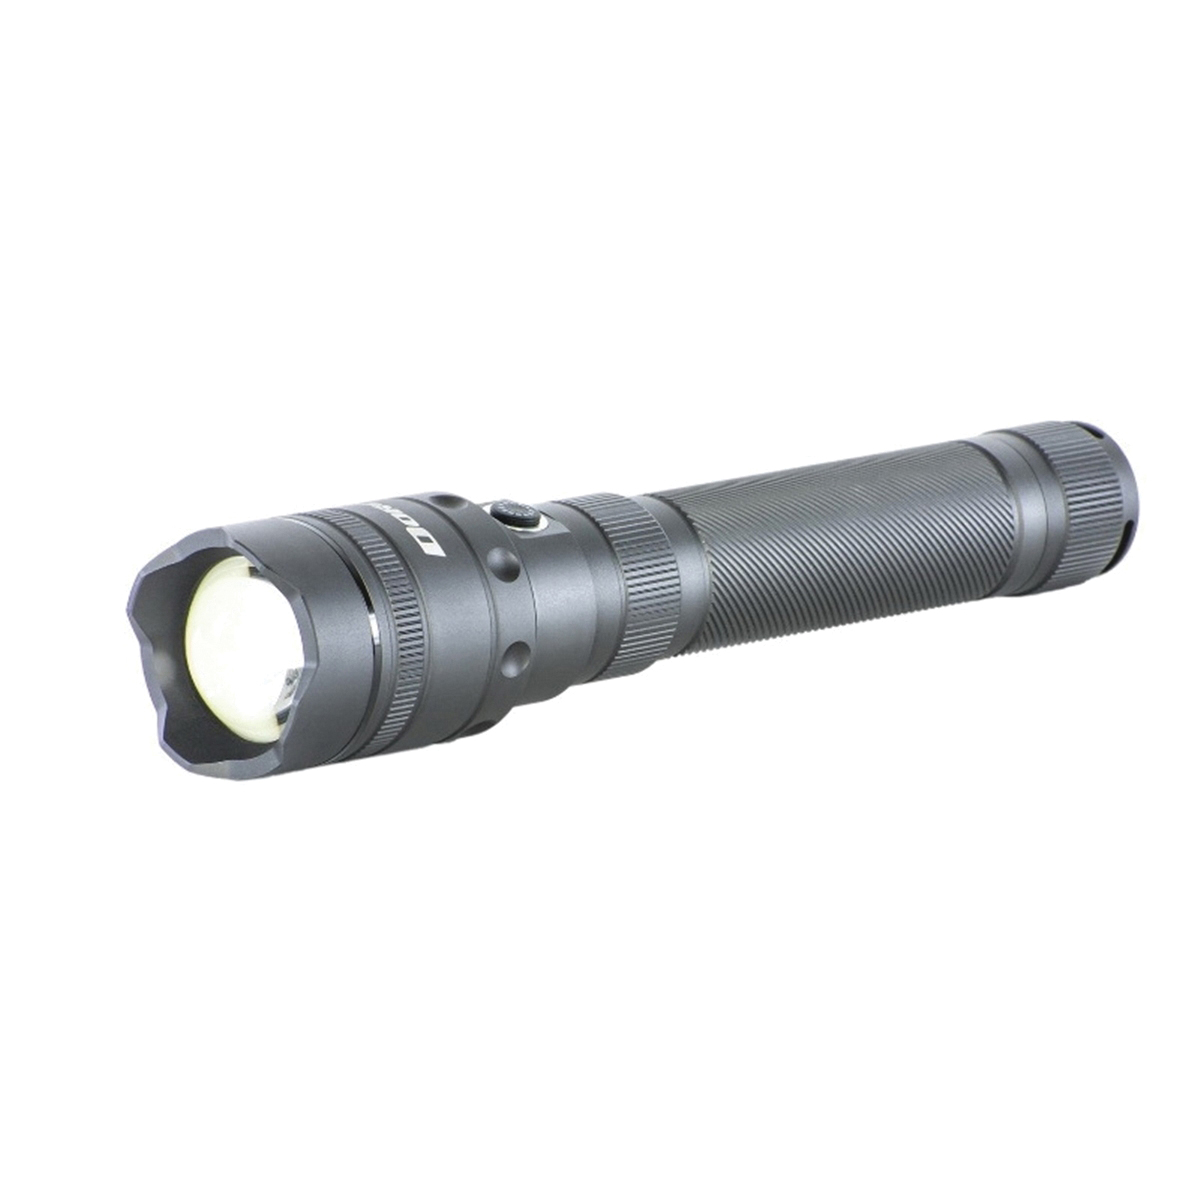 Pro Series 41-2611 Flashlight and Power Bank, 5000 mAh, Lithium-Ion, Rechargeable Battery, LED Lamp, 5 hr Run Time